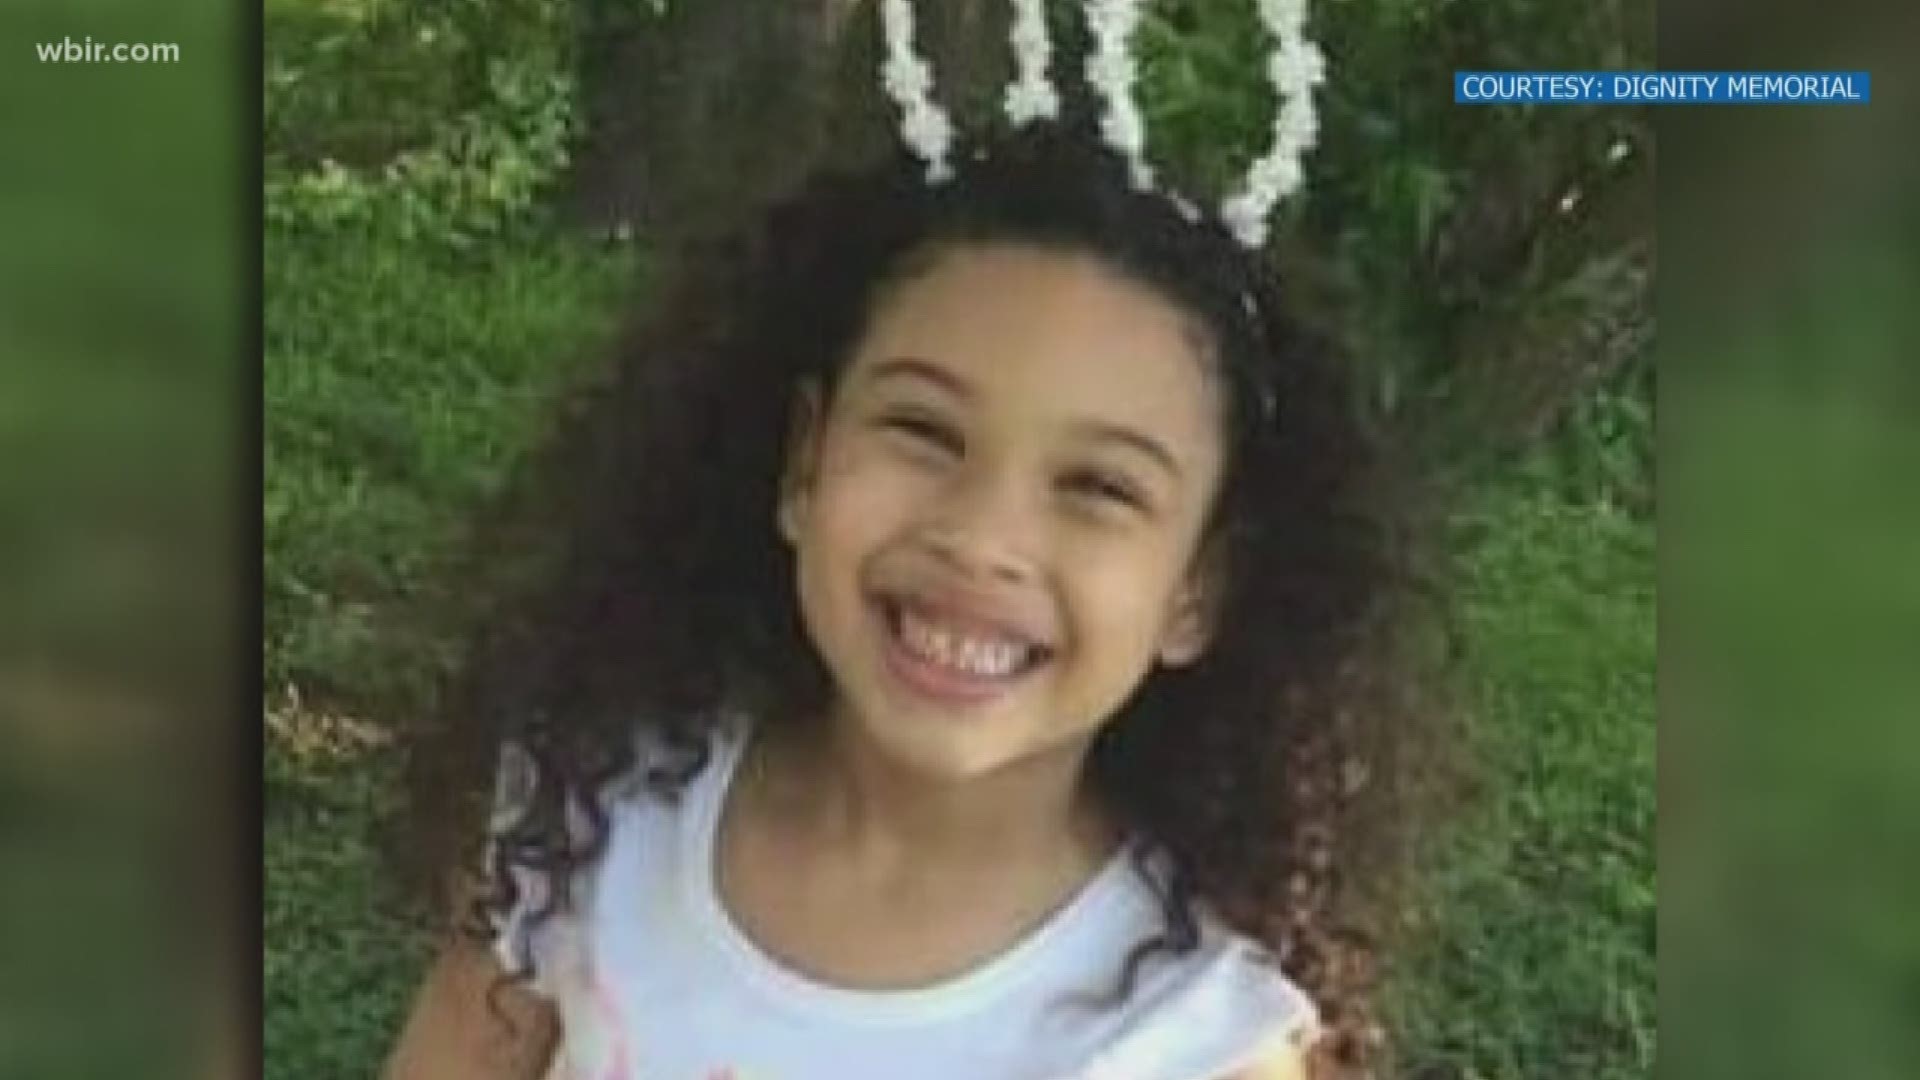 People who knew the little girl are shocked and saddened by her death as her mother faces charges for tampering with evidence after the shooting.